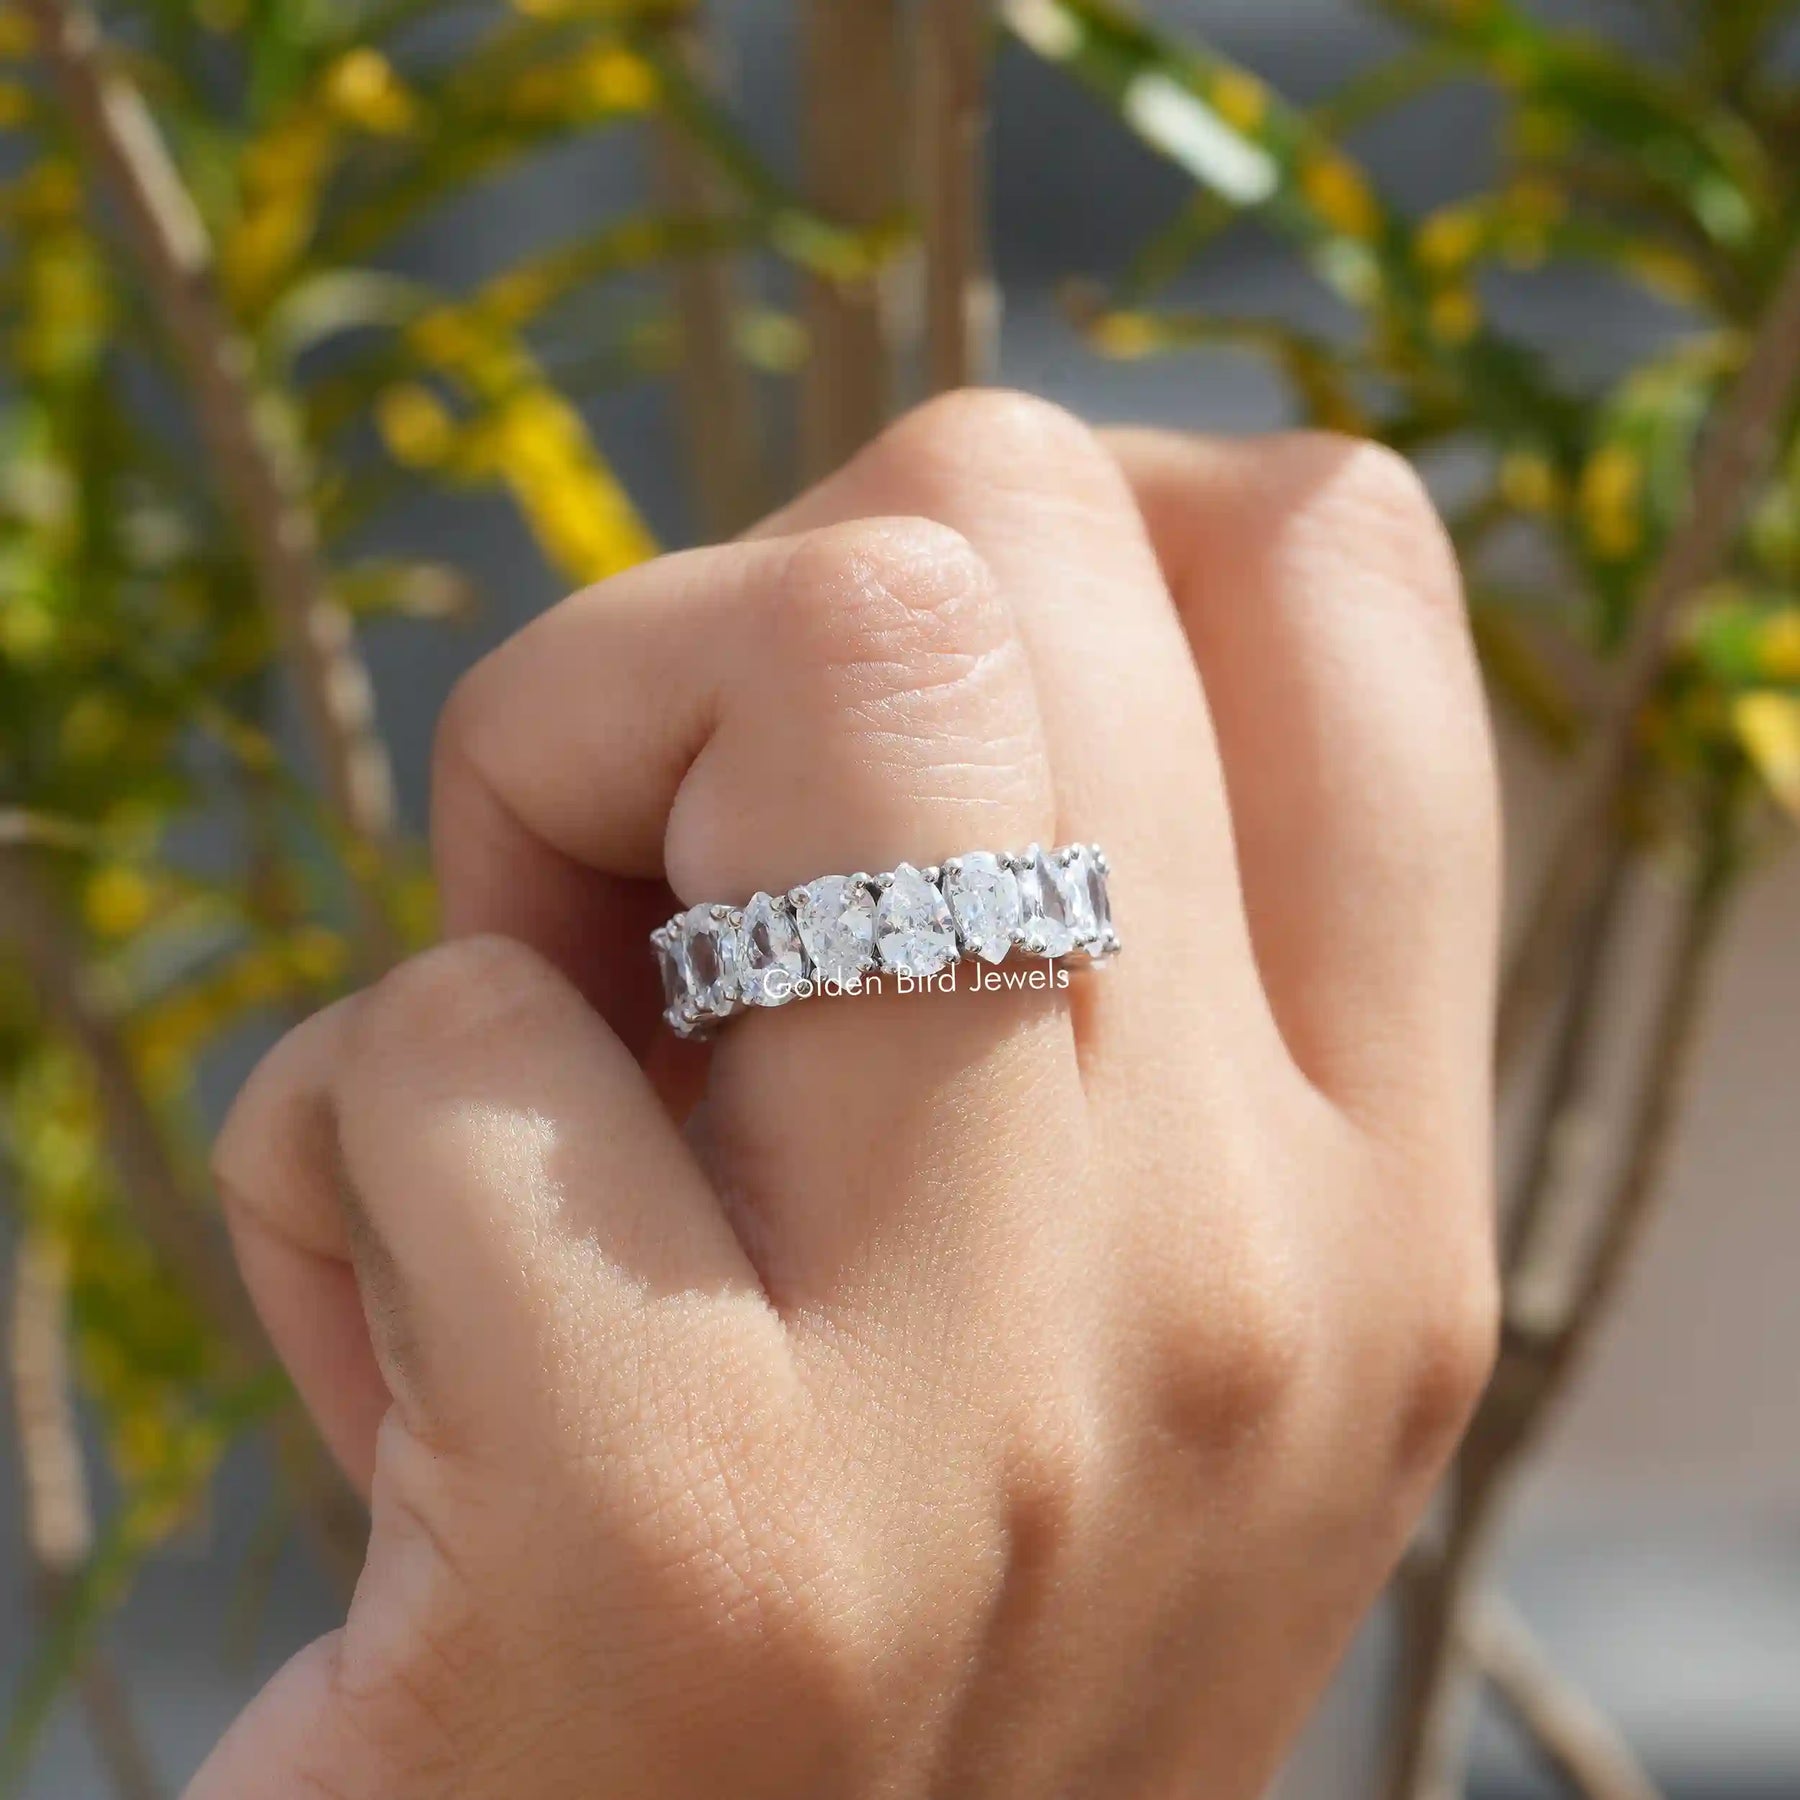 [In finger pear cut wedding eternity band set in prong setting]-[Golden Bird Jewels]